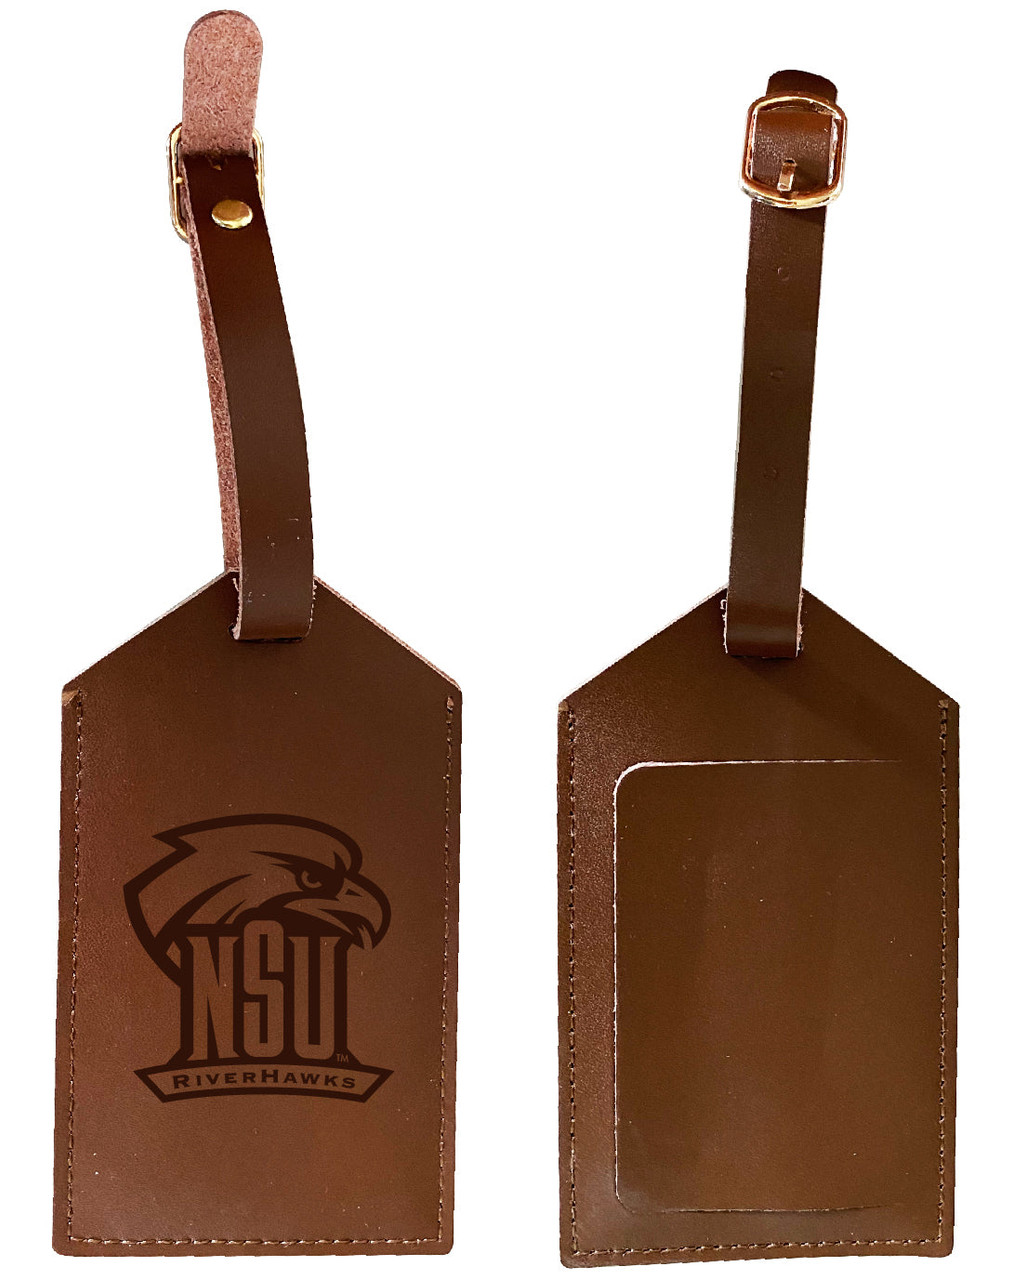 Northeastern State University Riverhawks Leather Luggage Tag Engraved